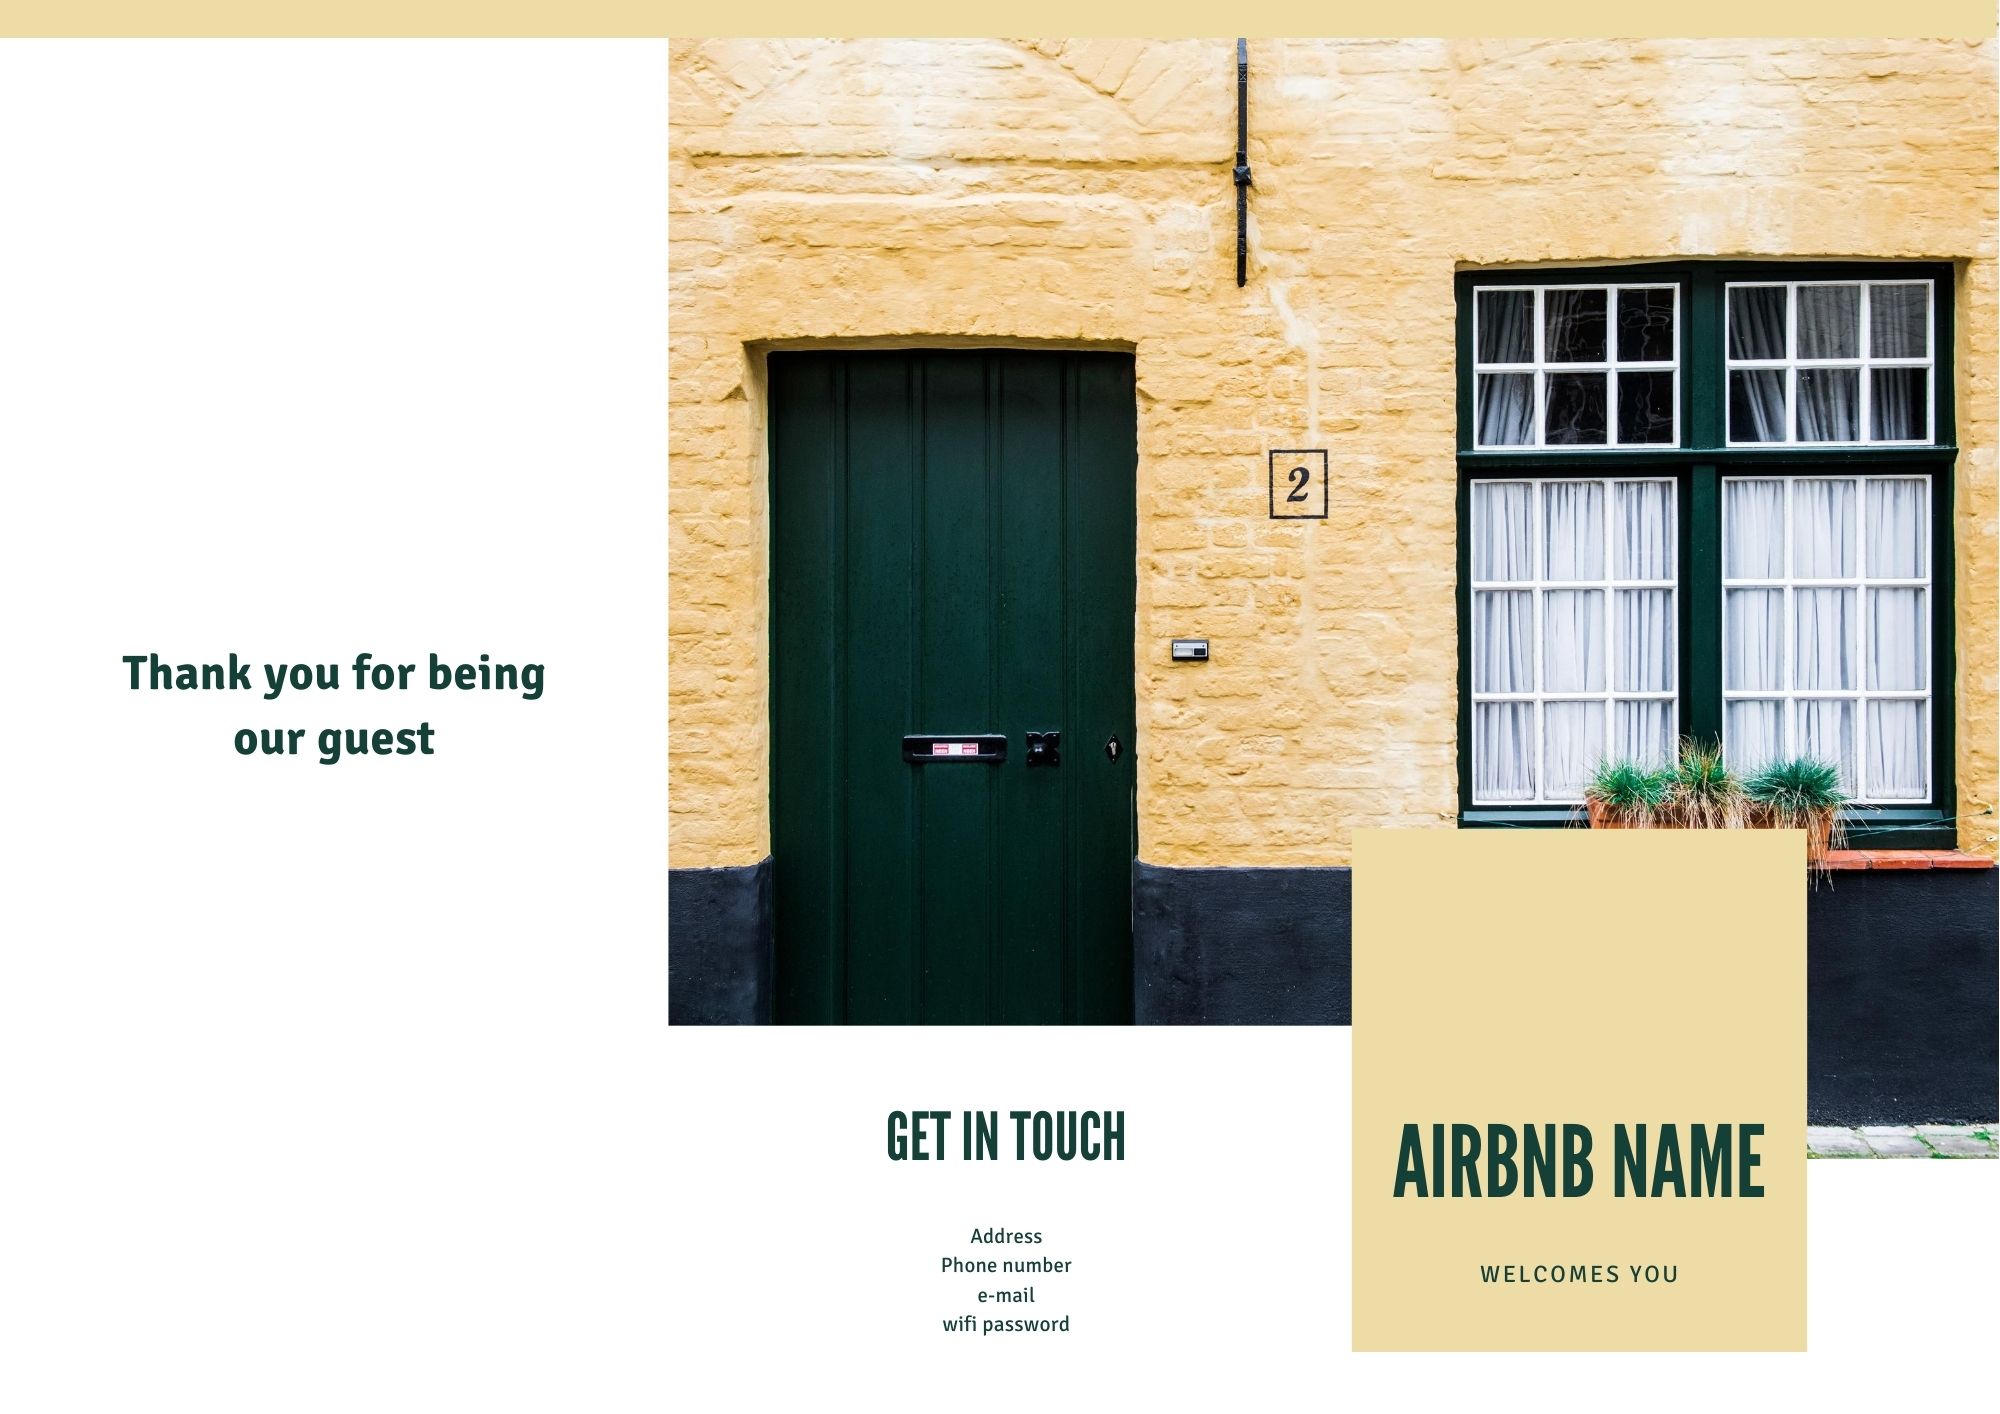 airbnb welcome book ideas